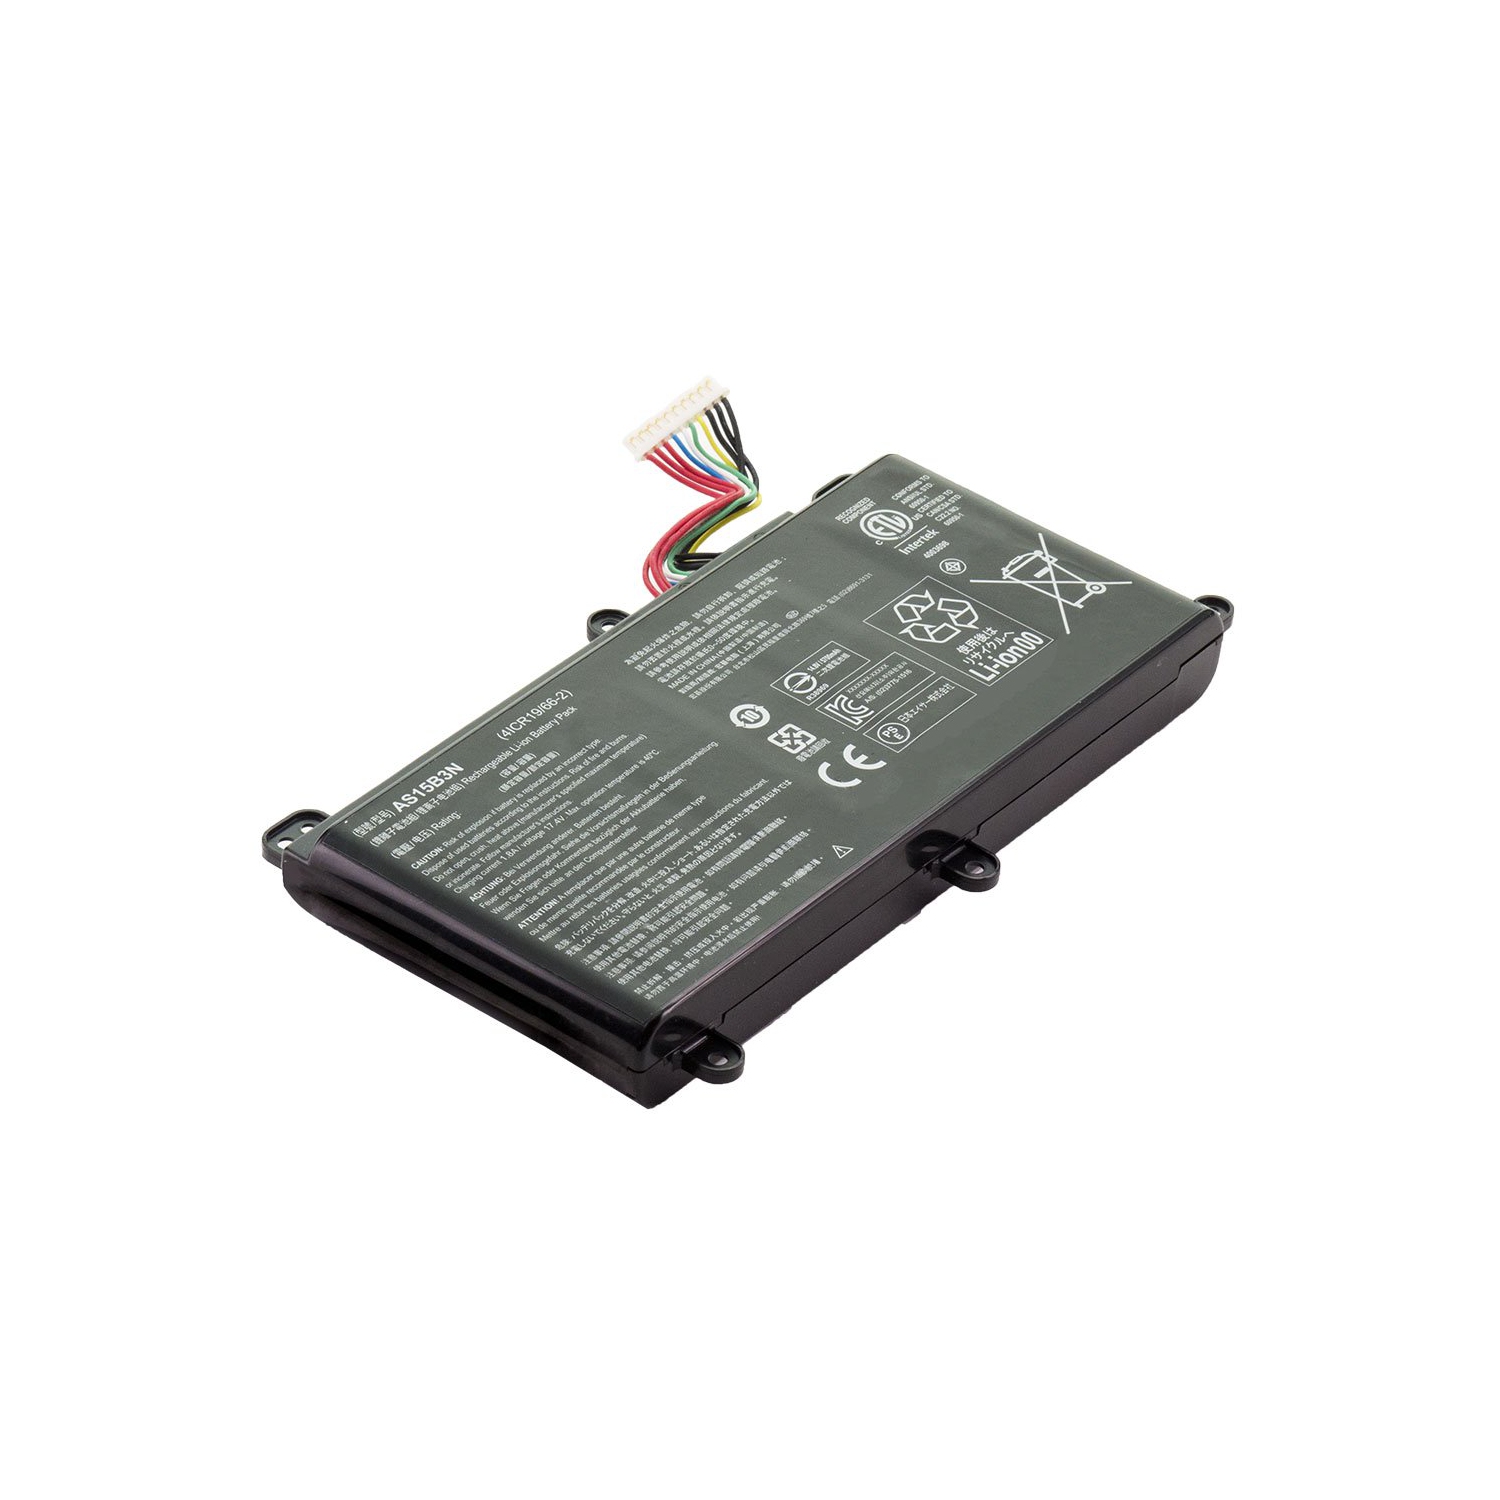 Laptop Battery Replacement for Acer Predator 15 G9-592-7925, AS15B3N, KT.00803.004, KT.00803.005